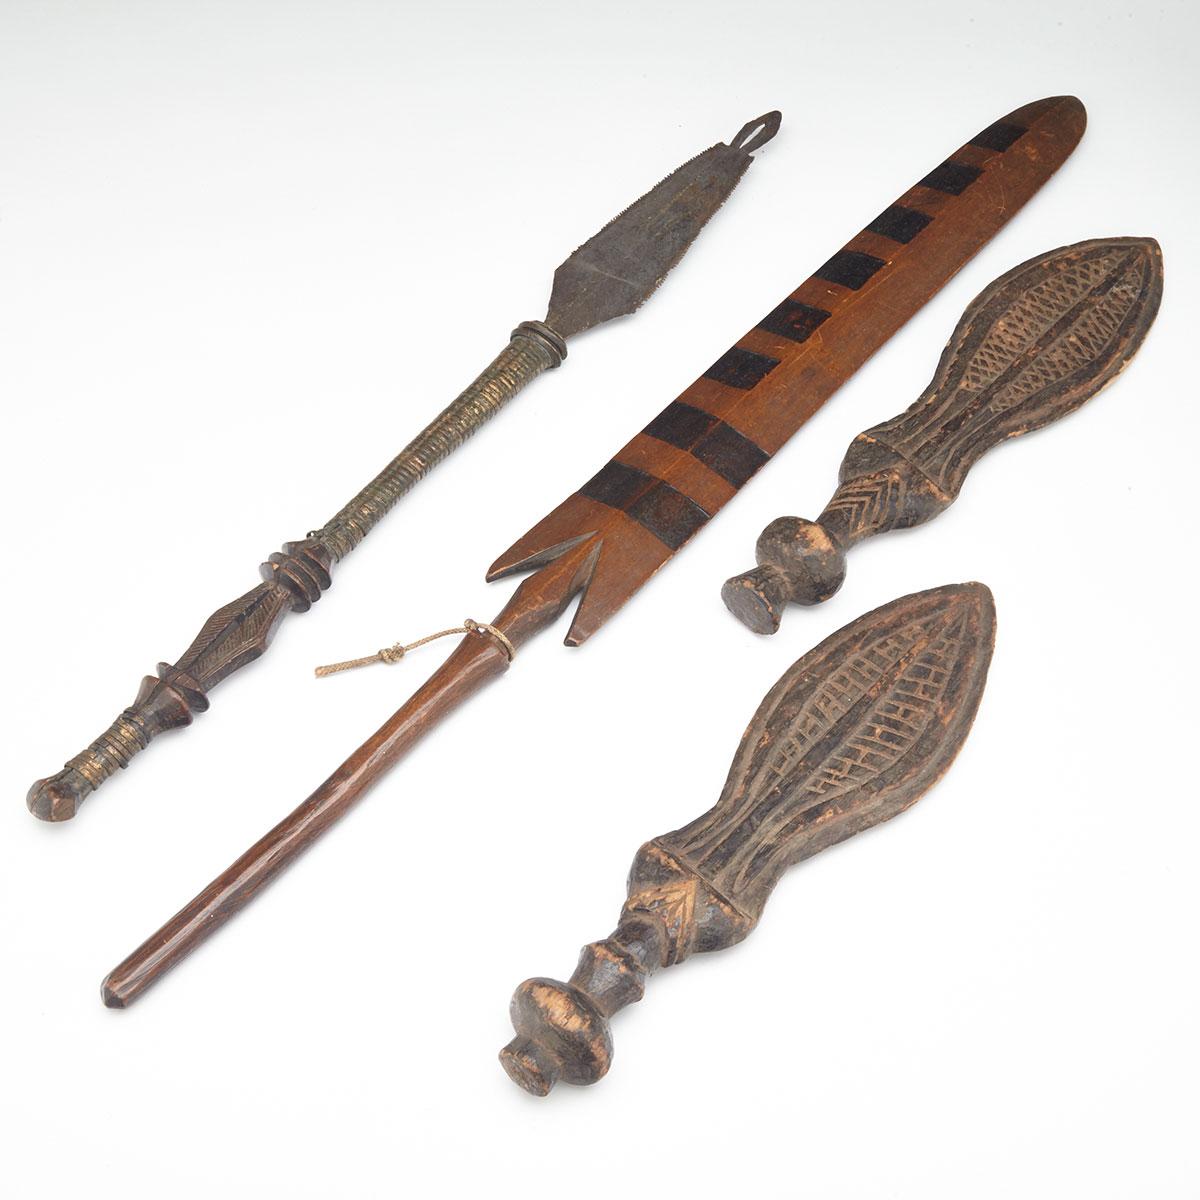 Group of African Wooden Edged Weapons, 19th/20th century